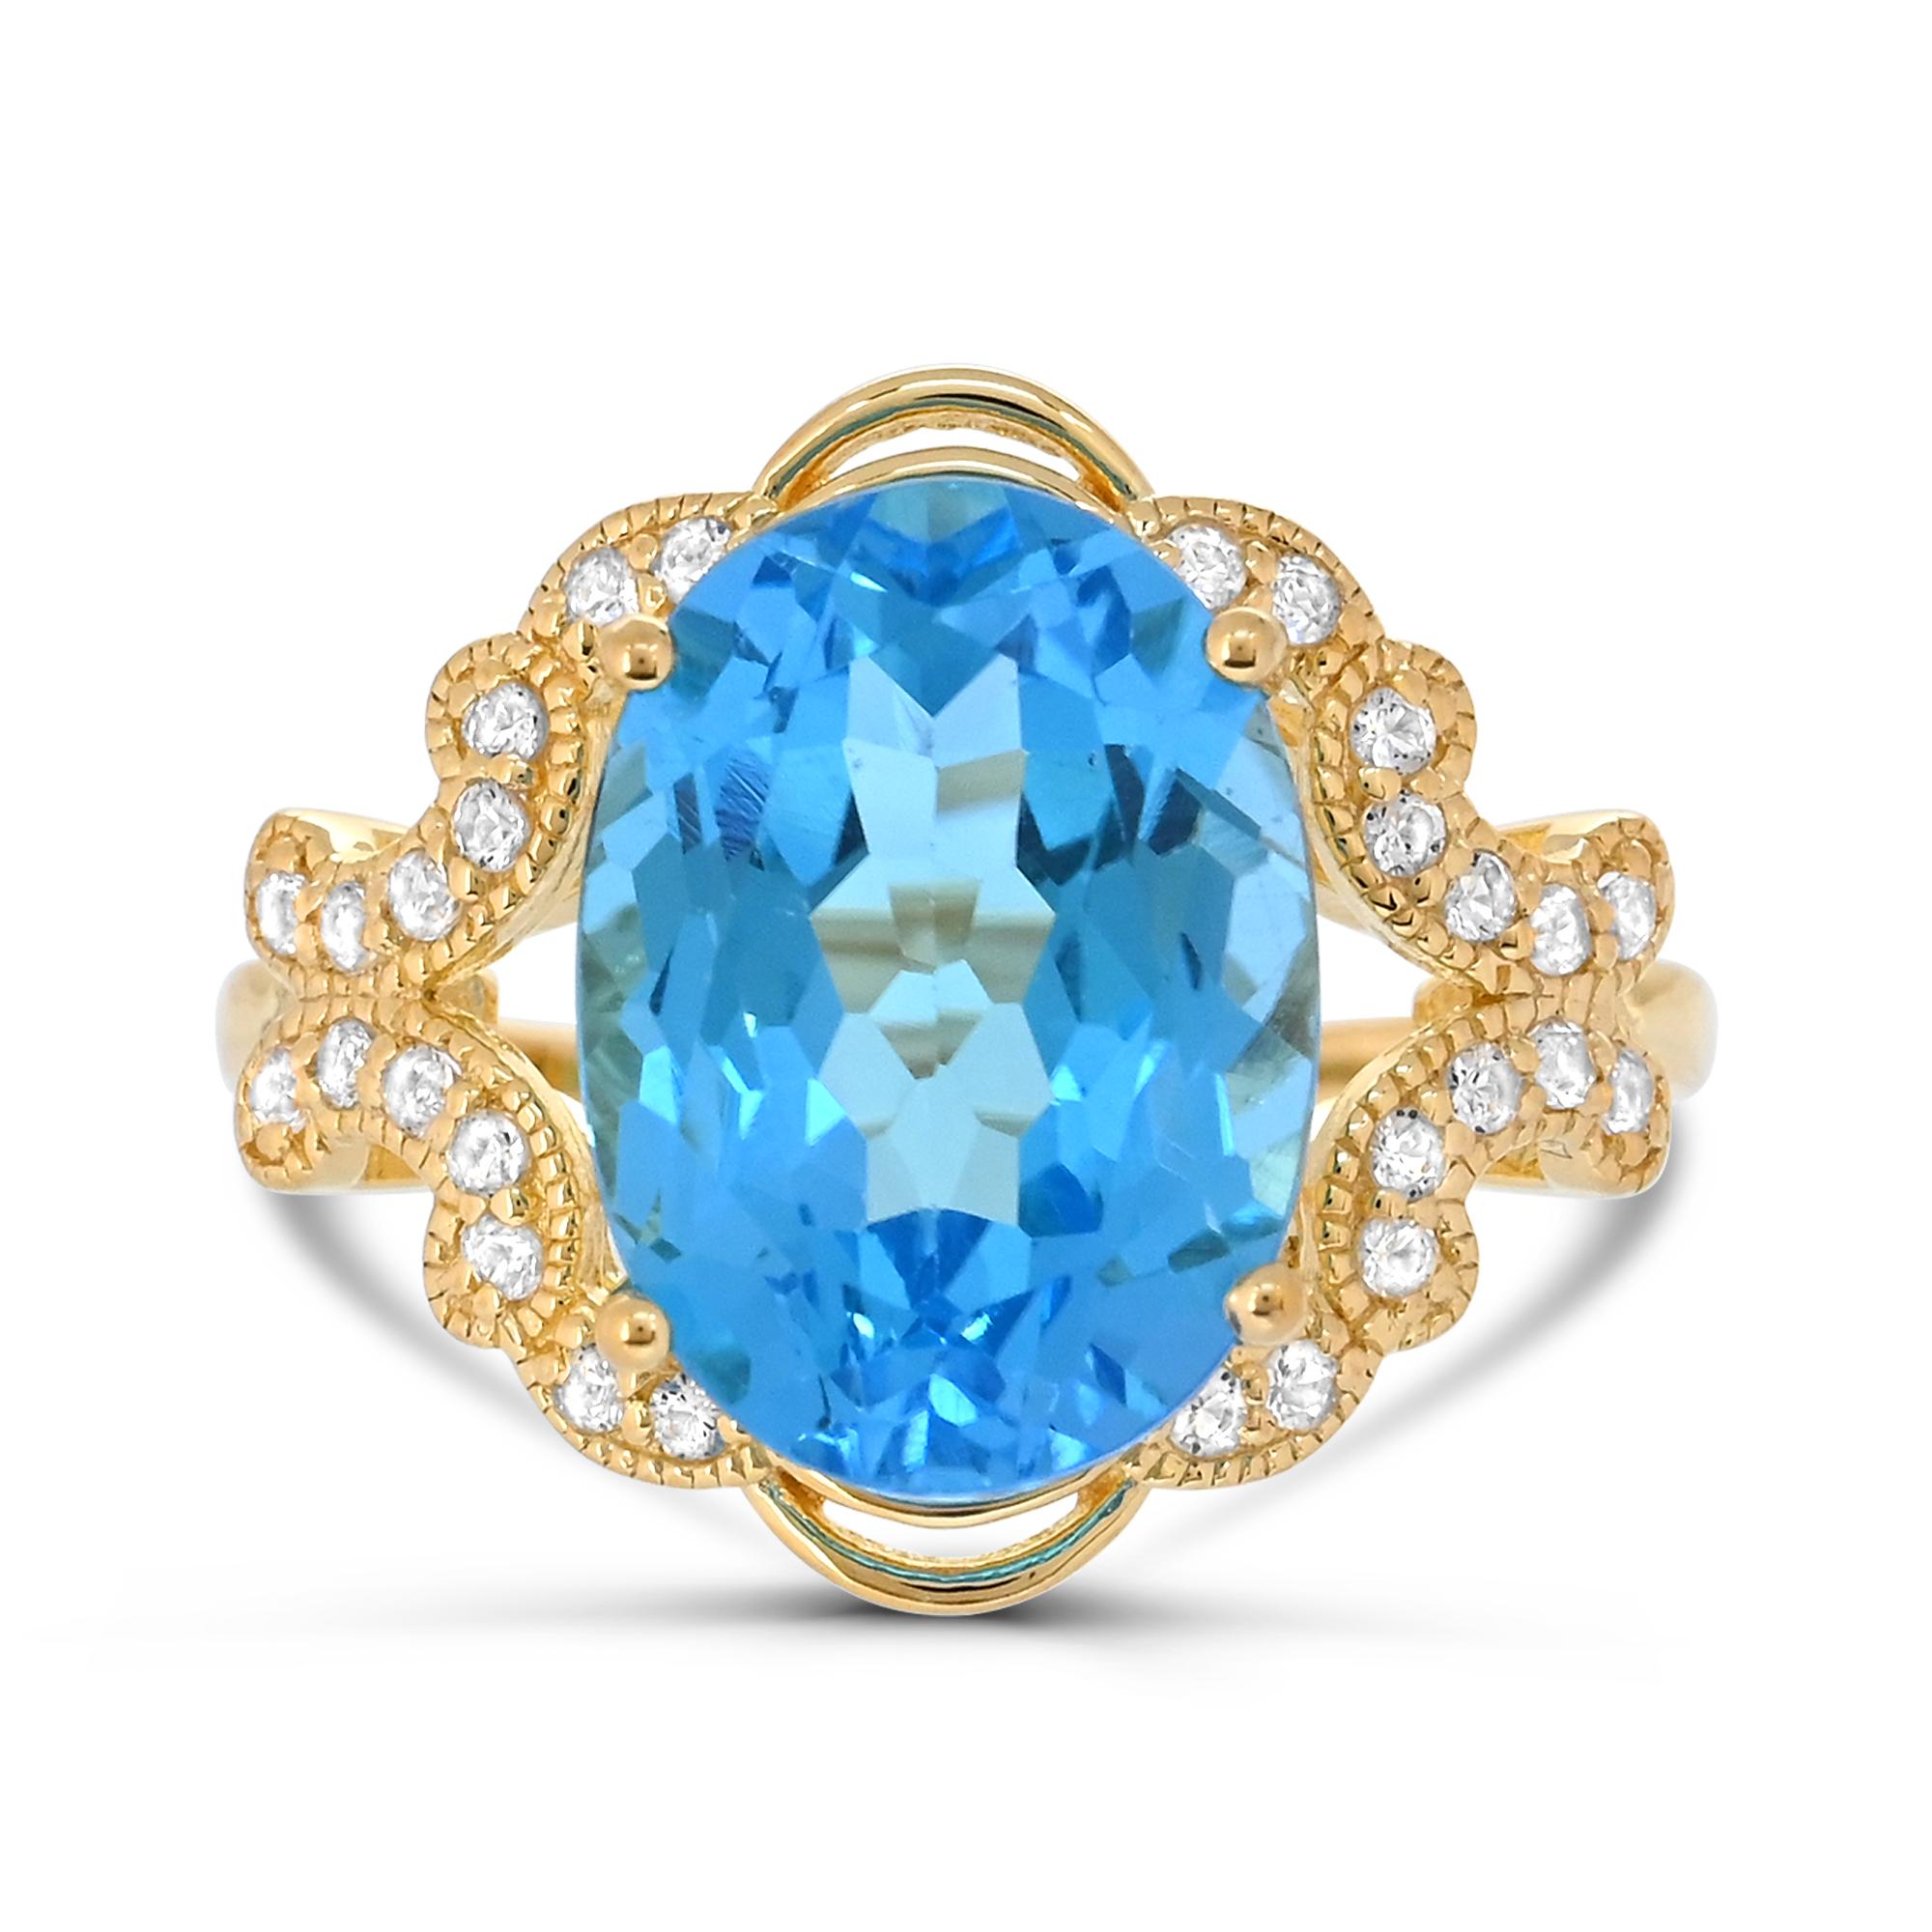 Indulge in the elegance of our Oval Swiss Blue Topaz and Round White Topaz Accented Ring in 14K Yellow Gold over Sterling Silver. Crafted with meticulous attention to detail, this ring boasts a stunning combination of one oval Swiss blue topaz